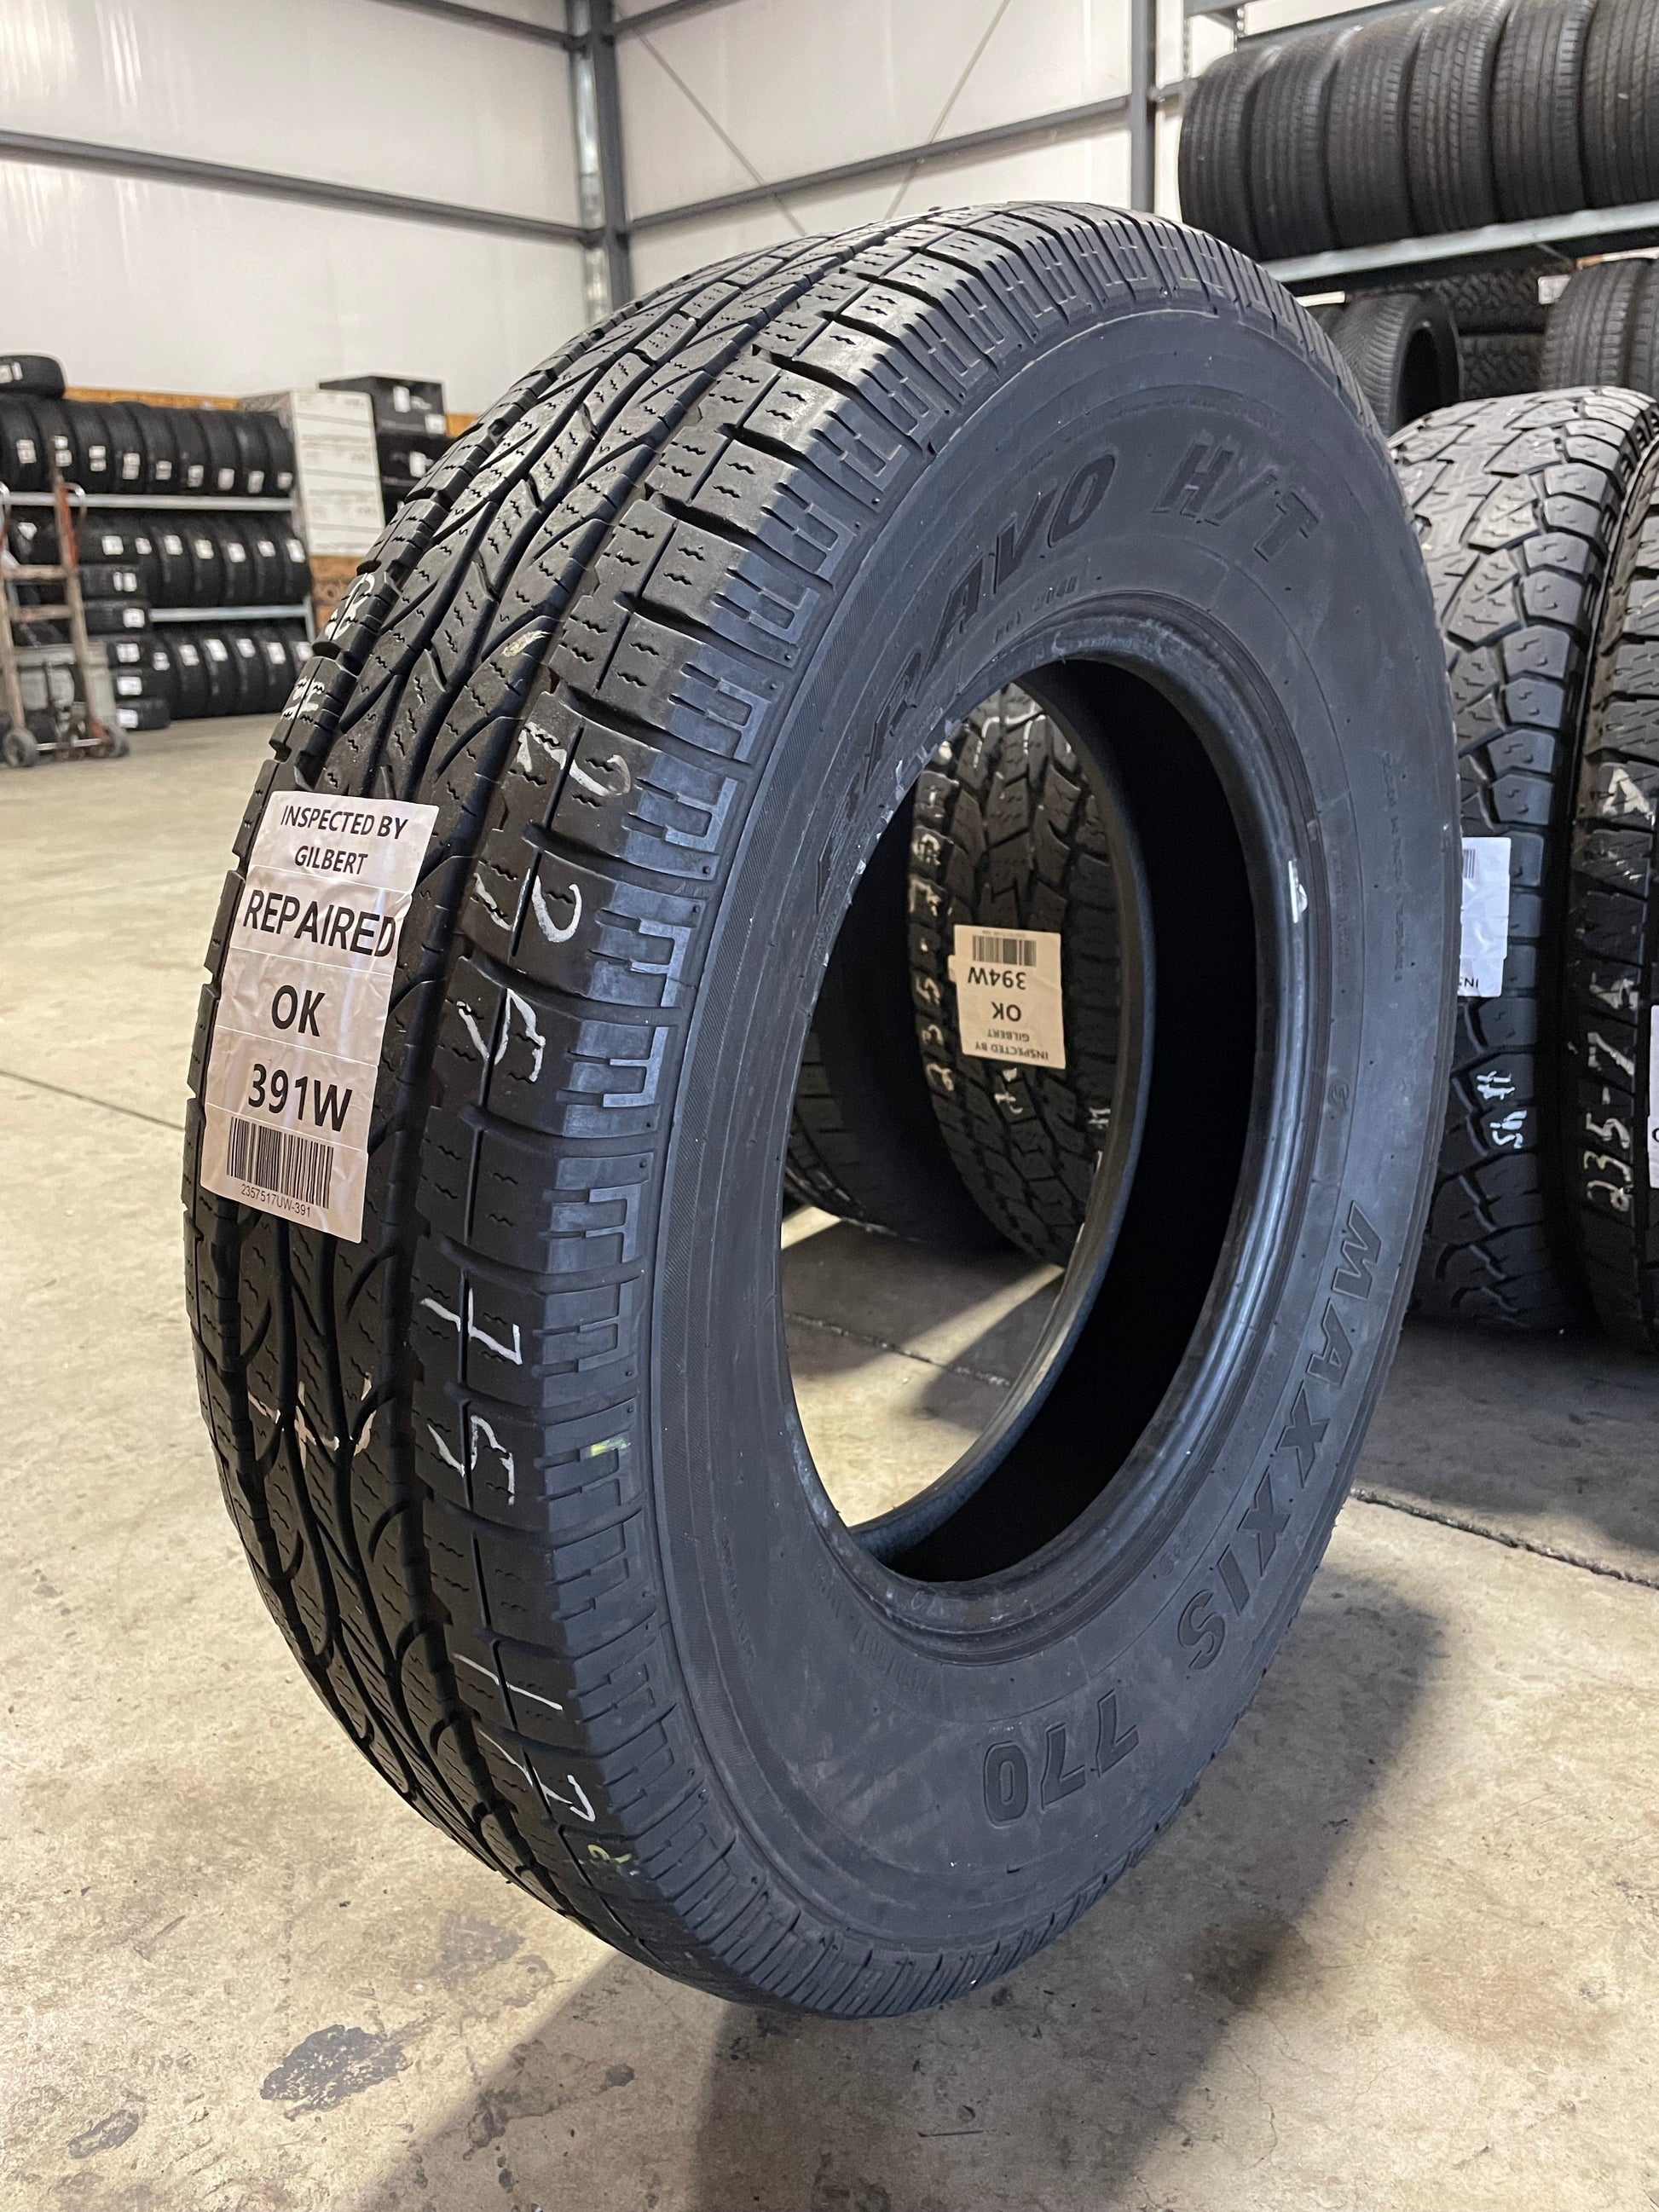 SINGLE 235/75R17 Maxxis Bravo H/T 770 109 S SL - Used Tires